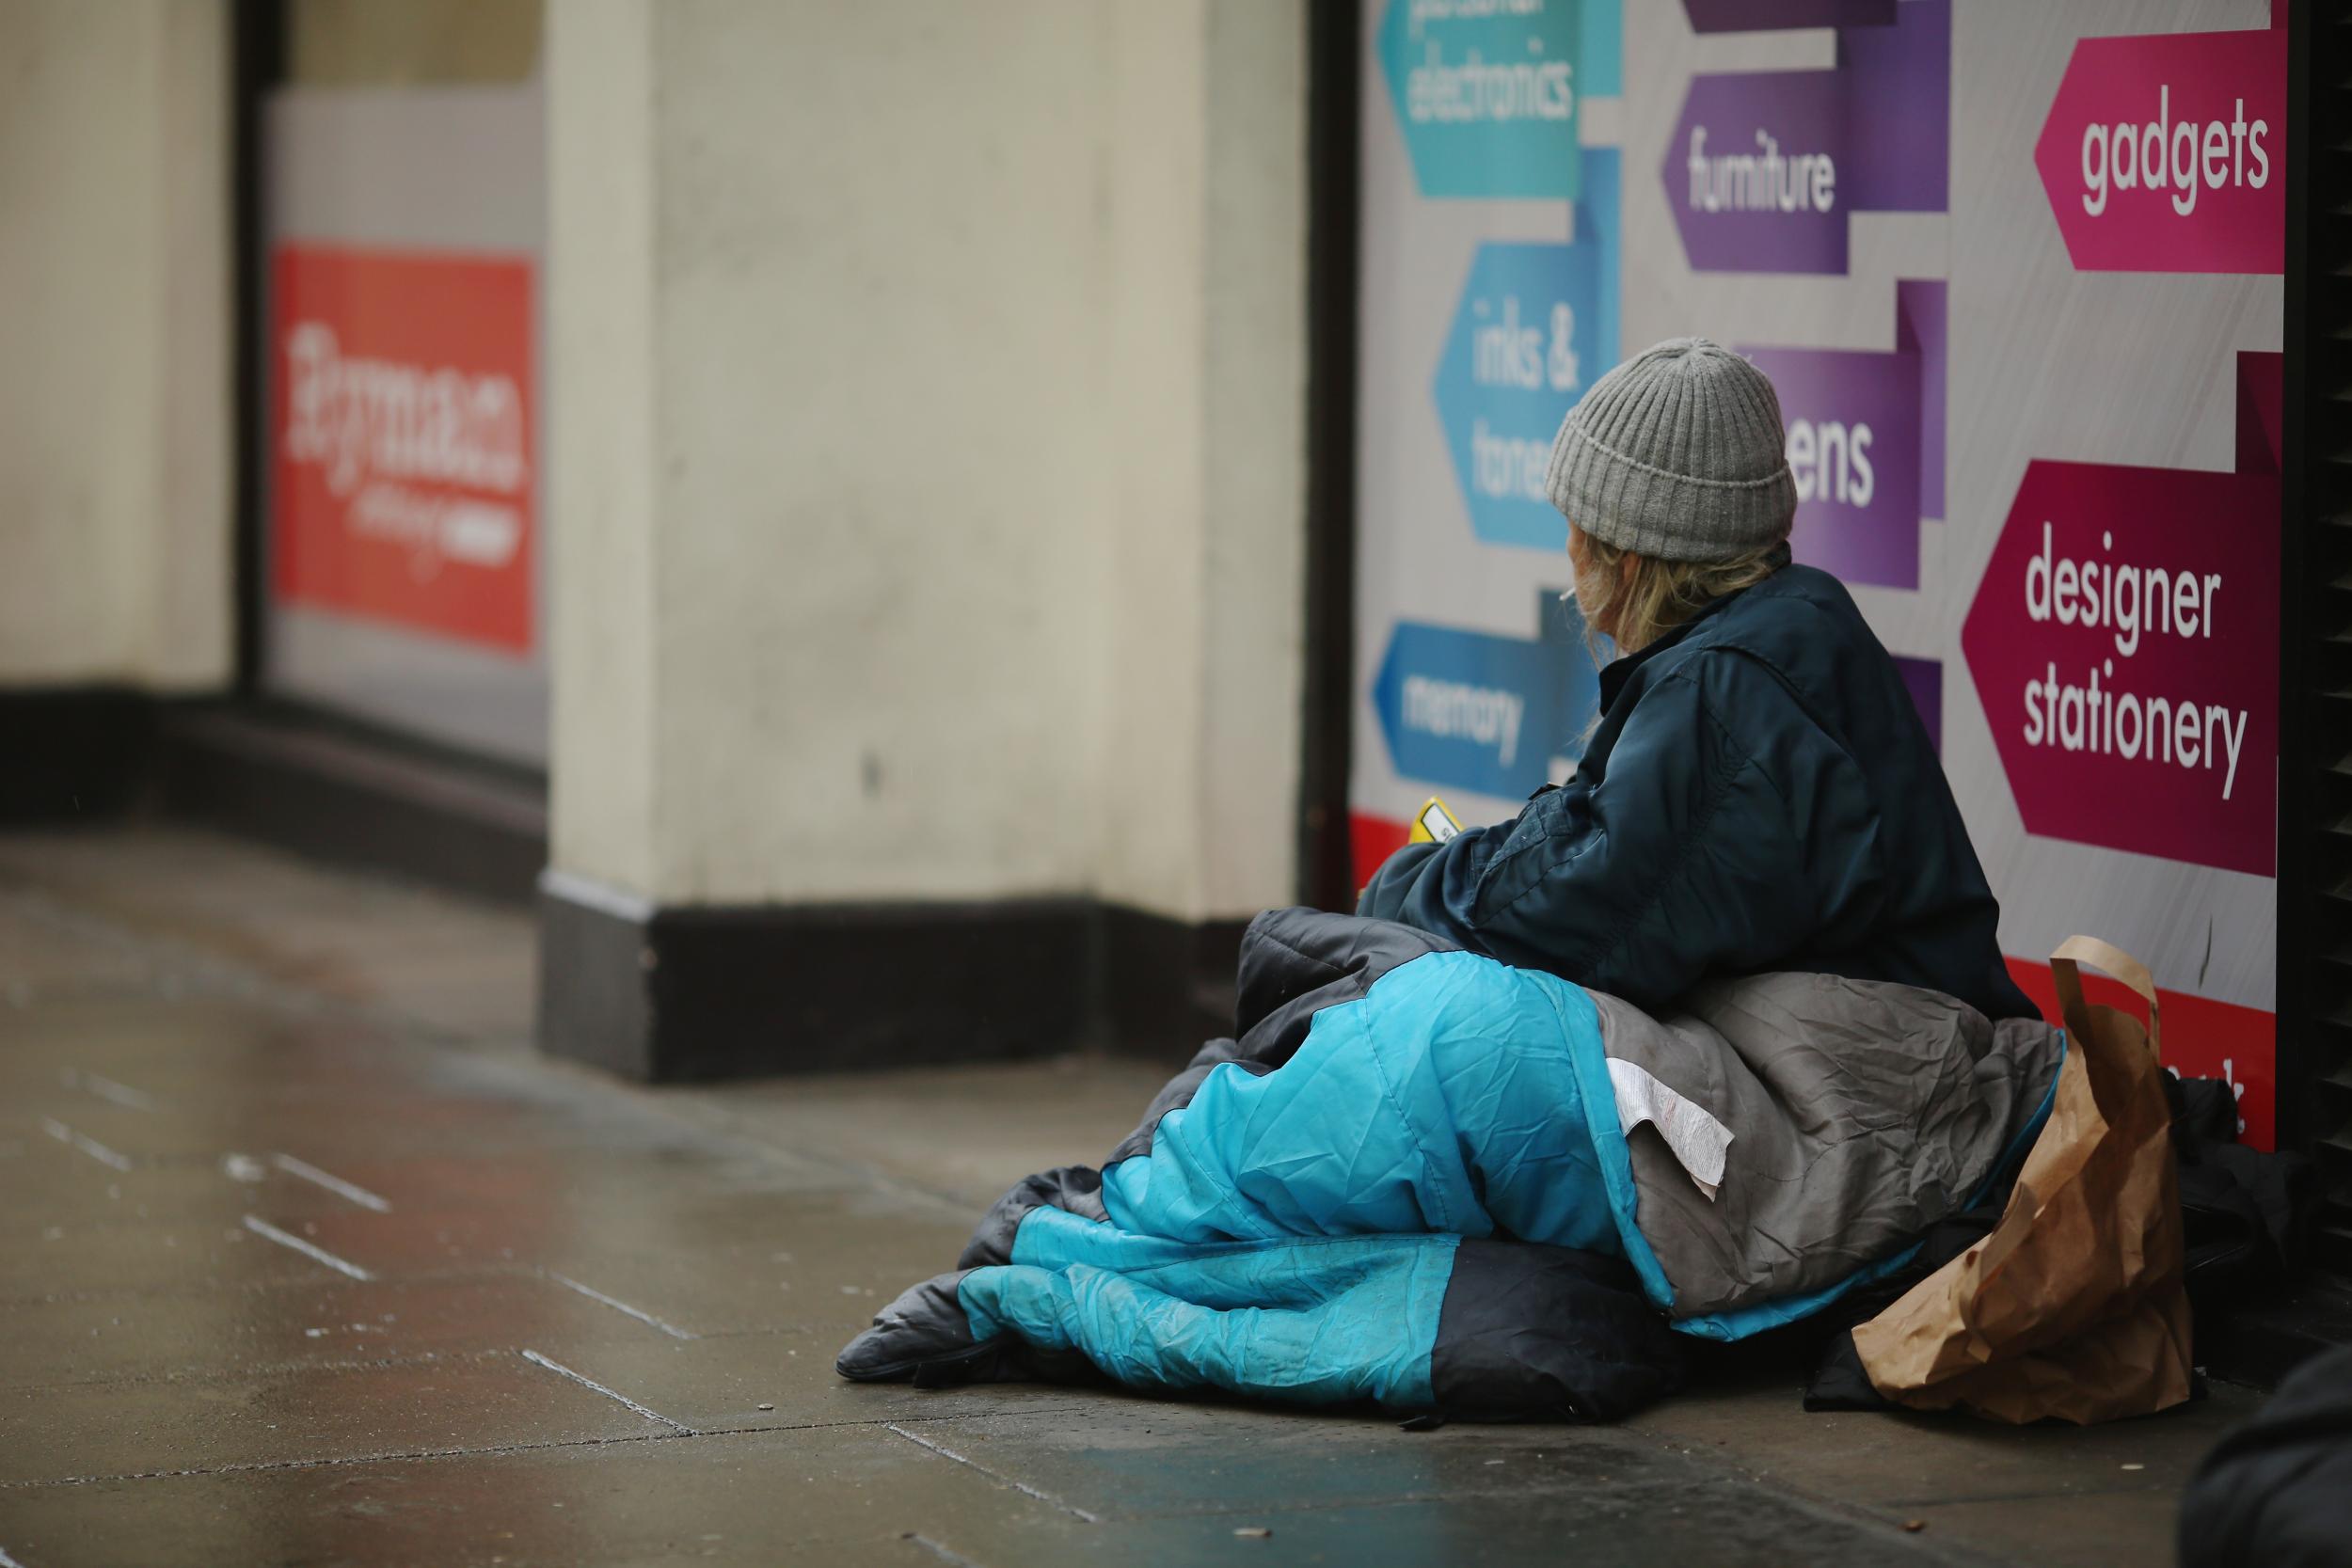 What To Do If You See A Homeless Person Sleeping Rough On The